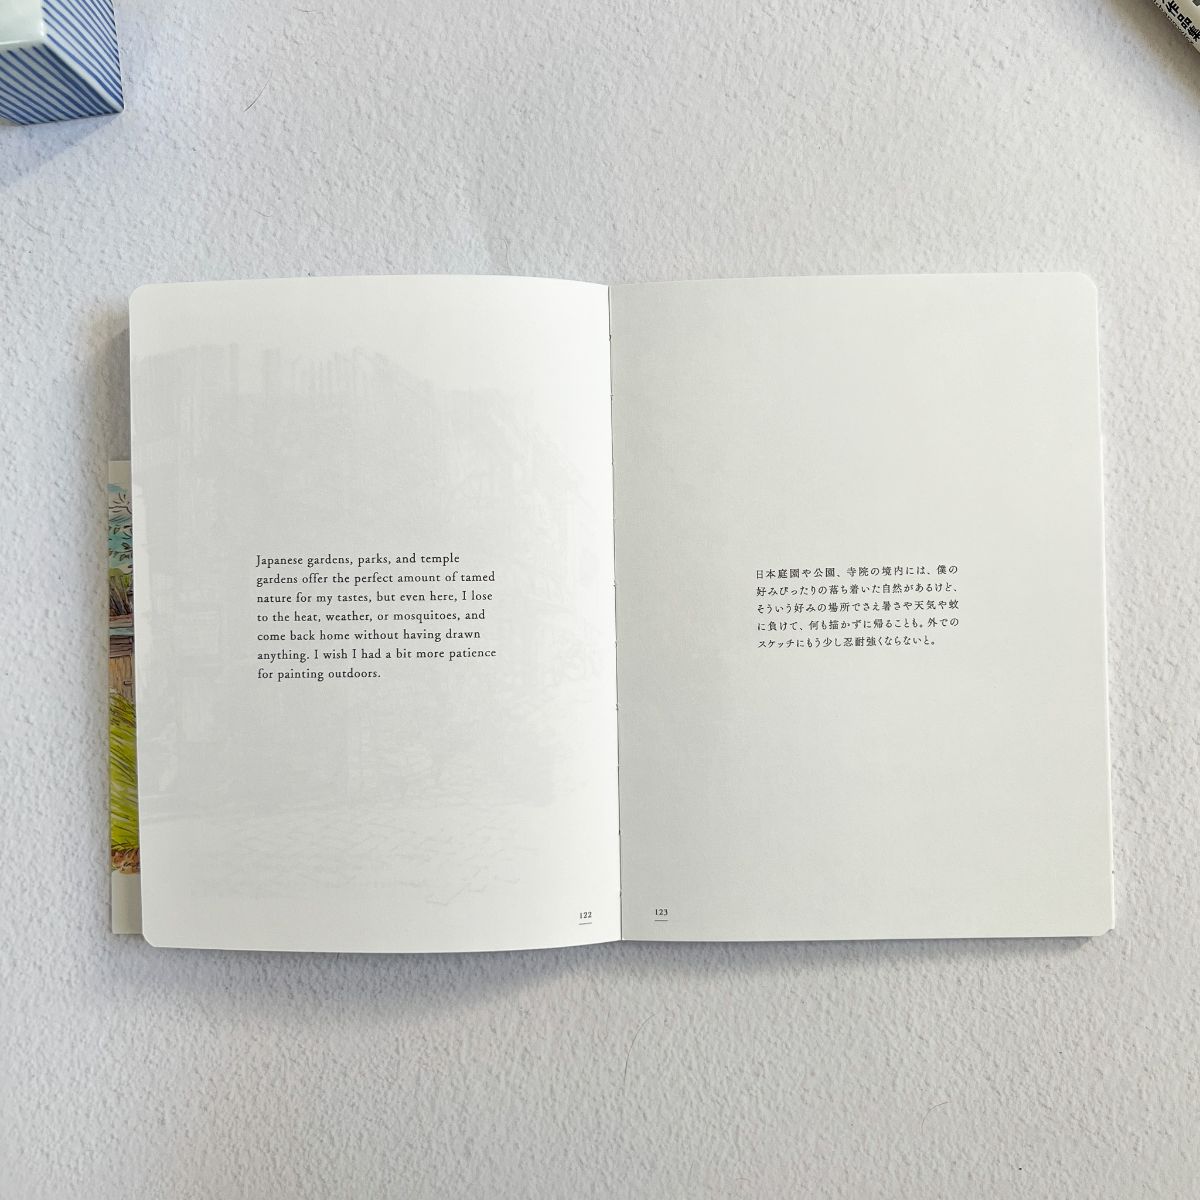 The Artworks of Mateusz Urbanowicz "Uncollected Works 2010-2021"BookNagamochi Shop